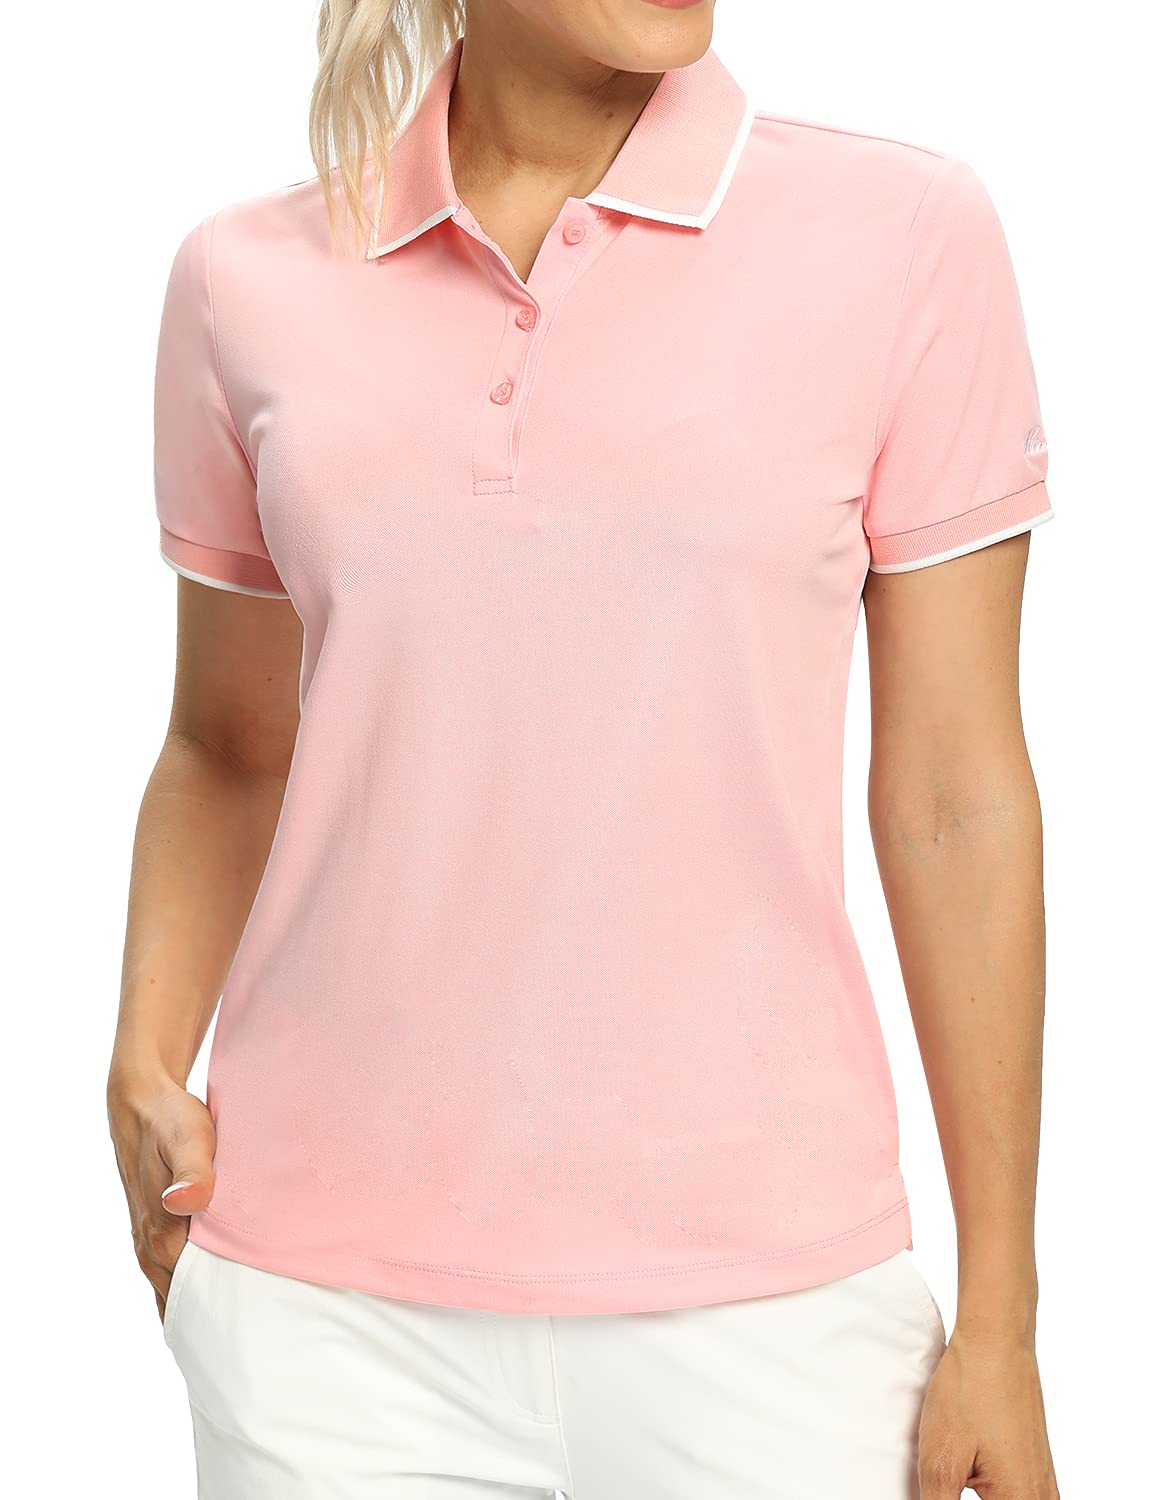 Daily for Quick-Dry Collared Golf Tennis Women Edge Shirts Work Shirts Pink-contrast Hiverlay X-Large Contrast UPF 50+ Tops Color Women Polo Shirts Color Edge Lightweight